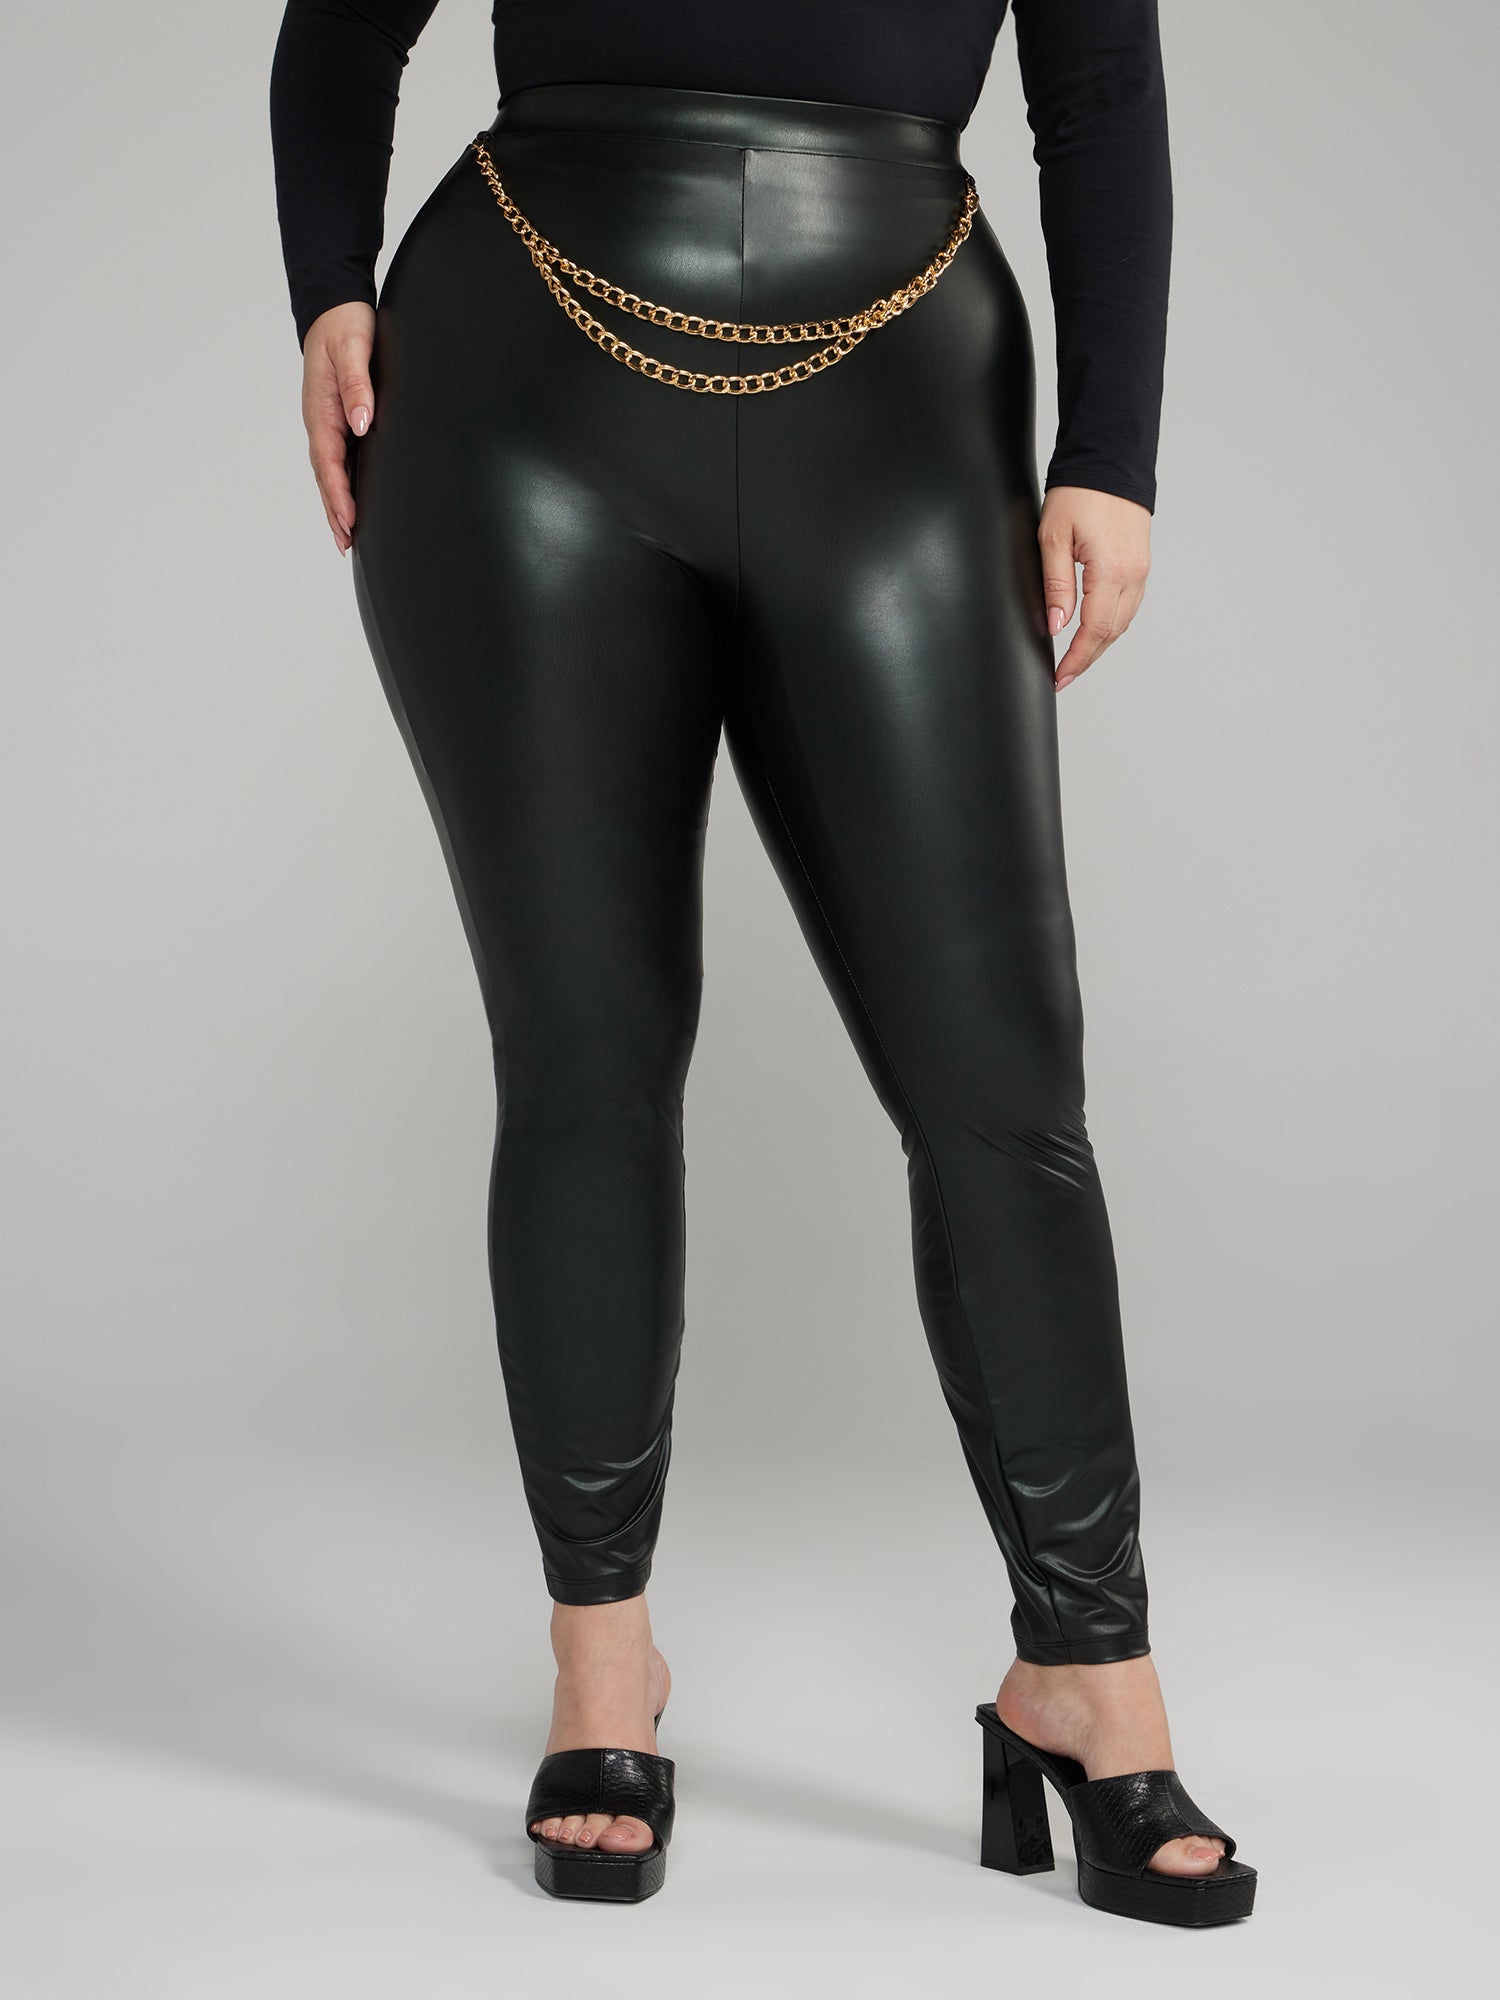 Leggings in eco-leather with beige chains